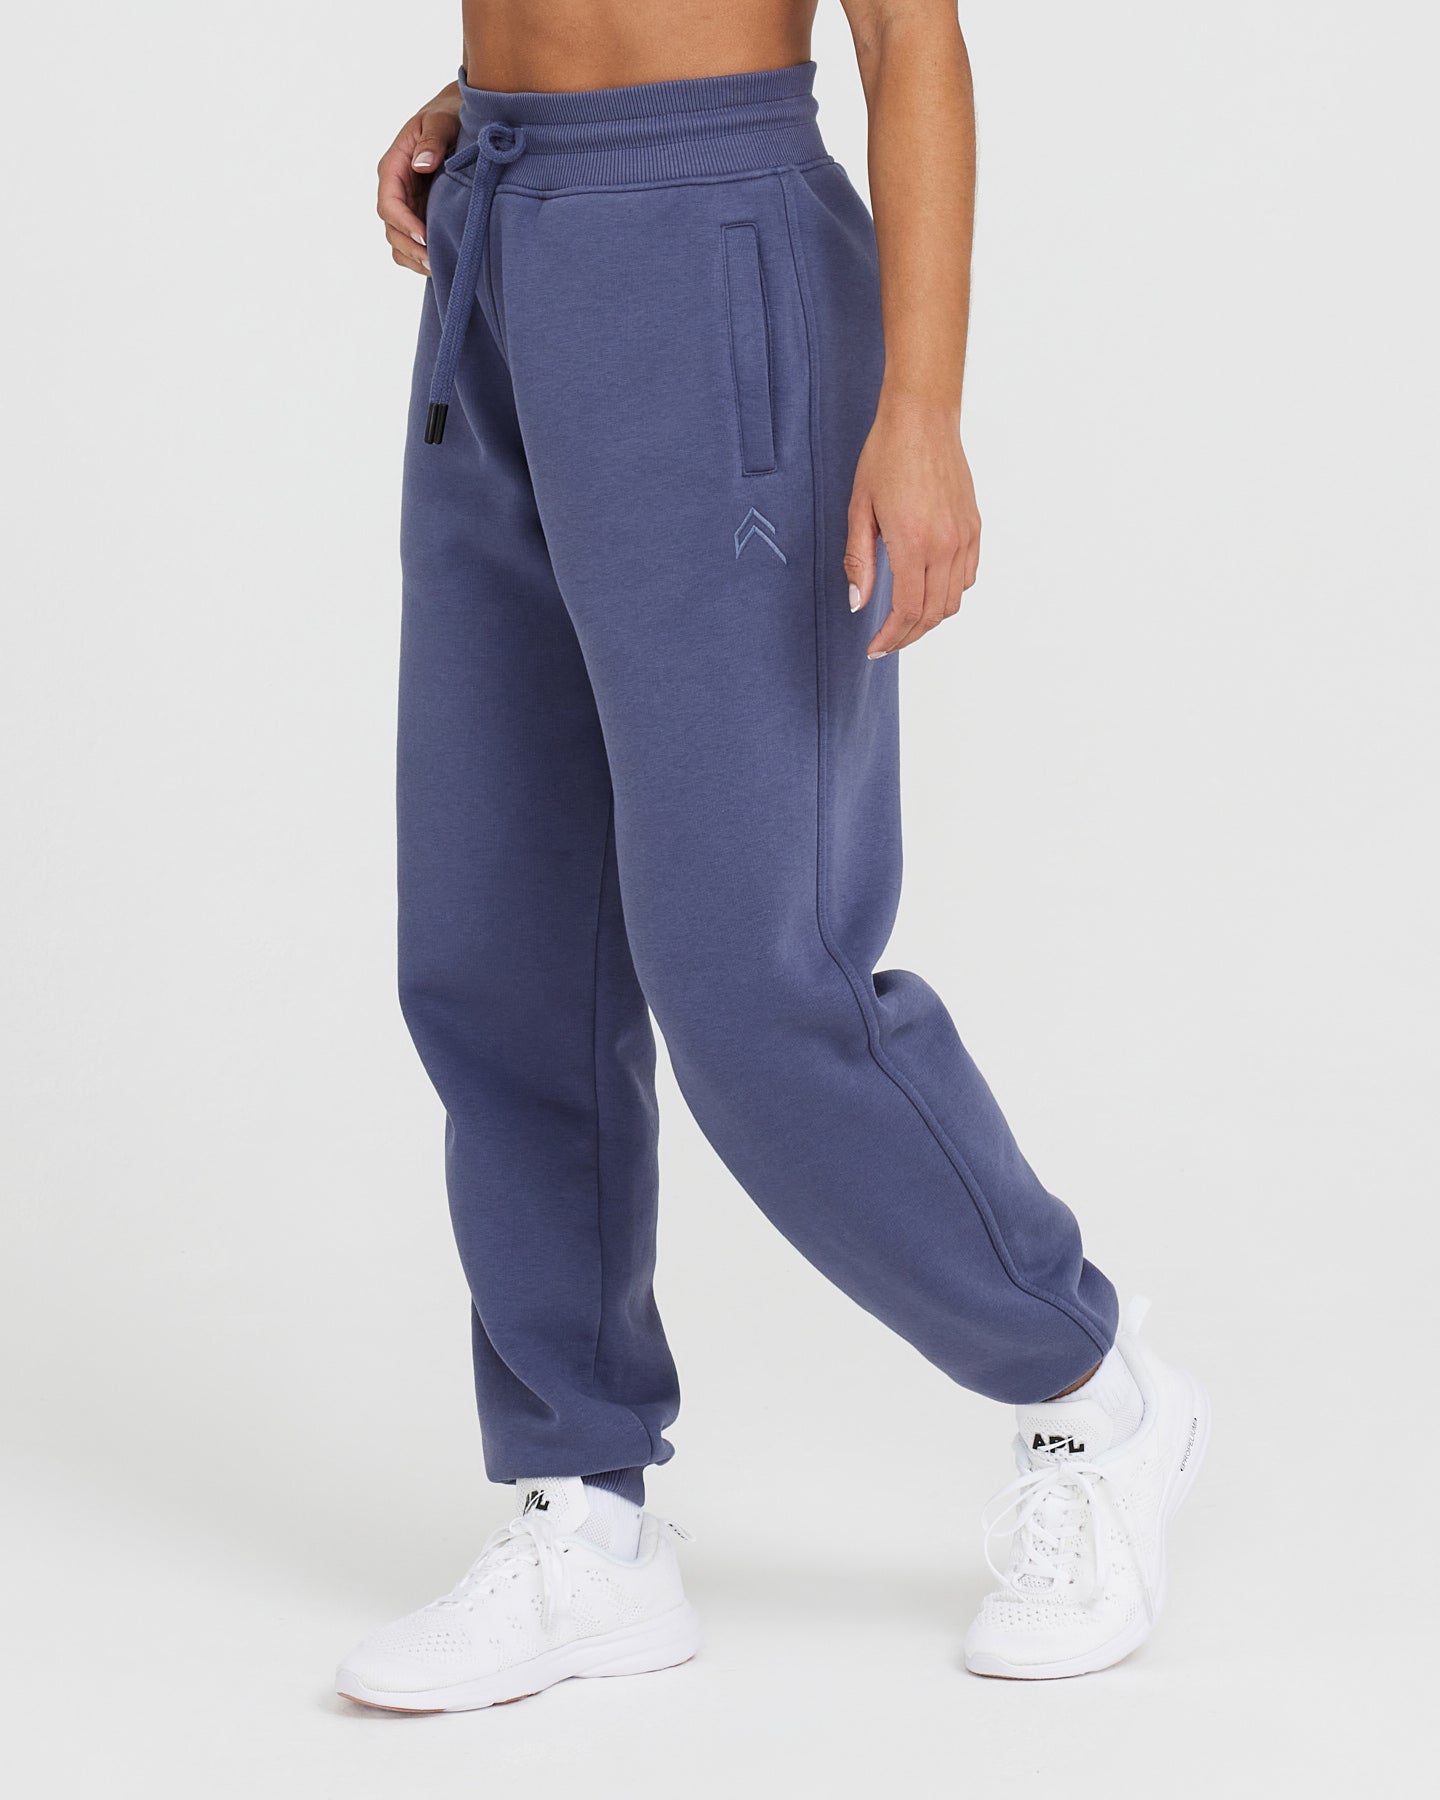 High Rise Joggers Women's - Slate Blue | Oner Active